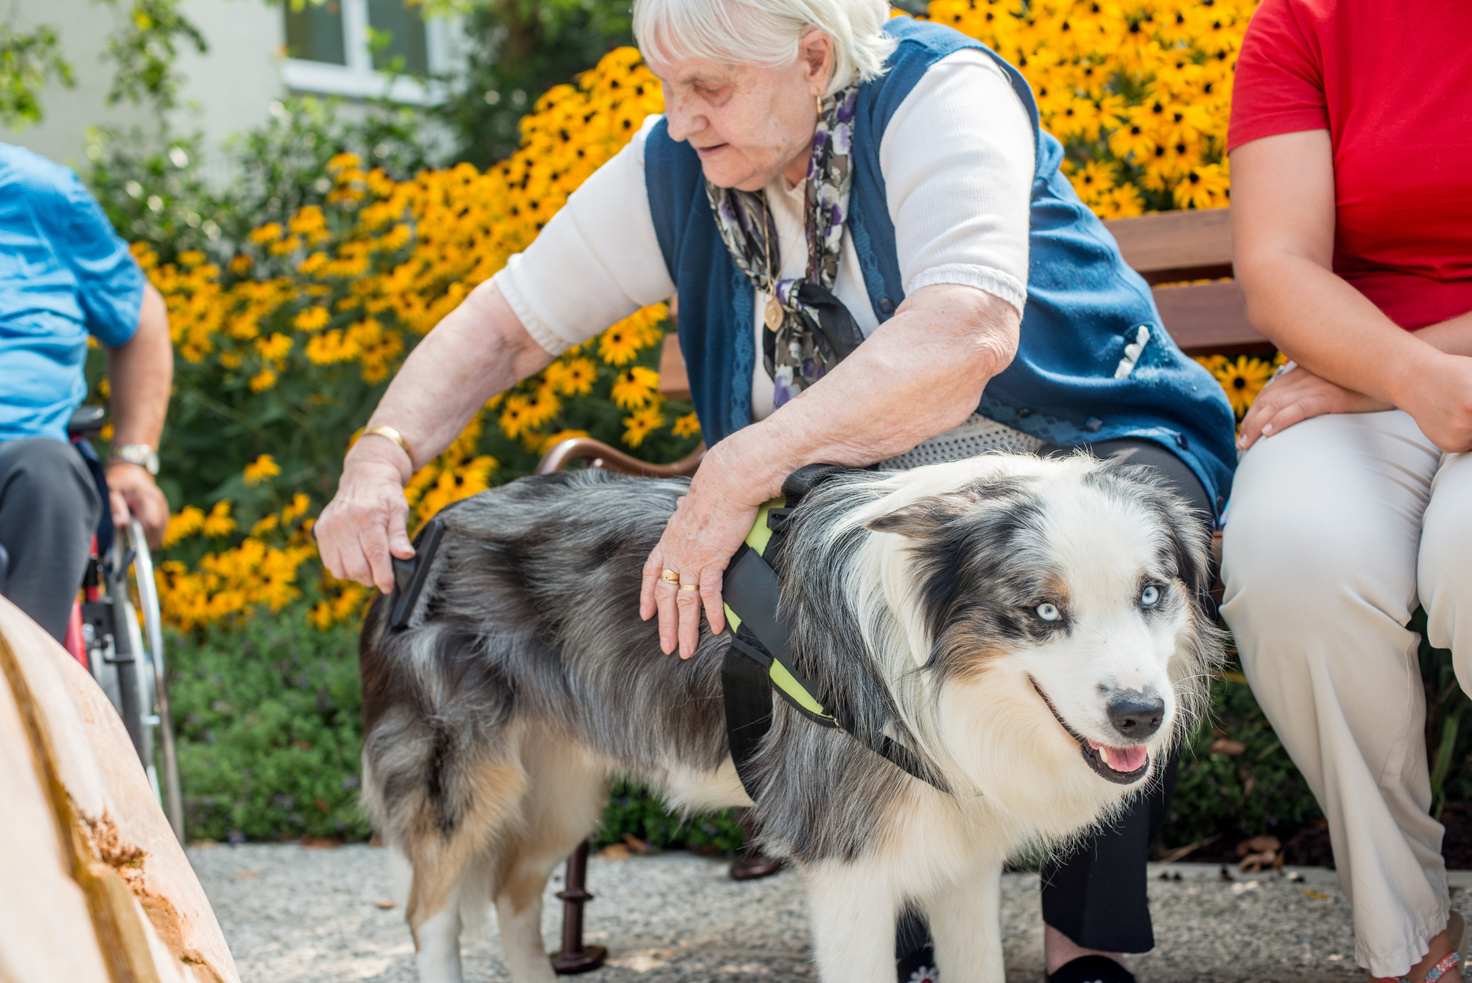 Dog As Emotional Support Animal For Seniors In The Nursing Home